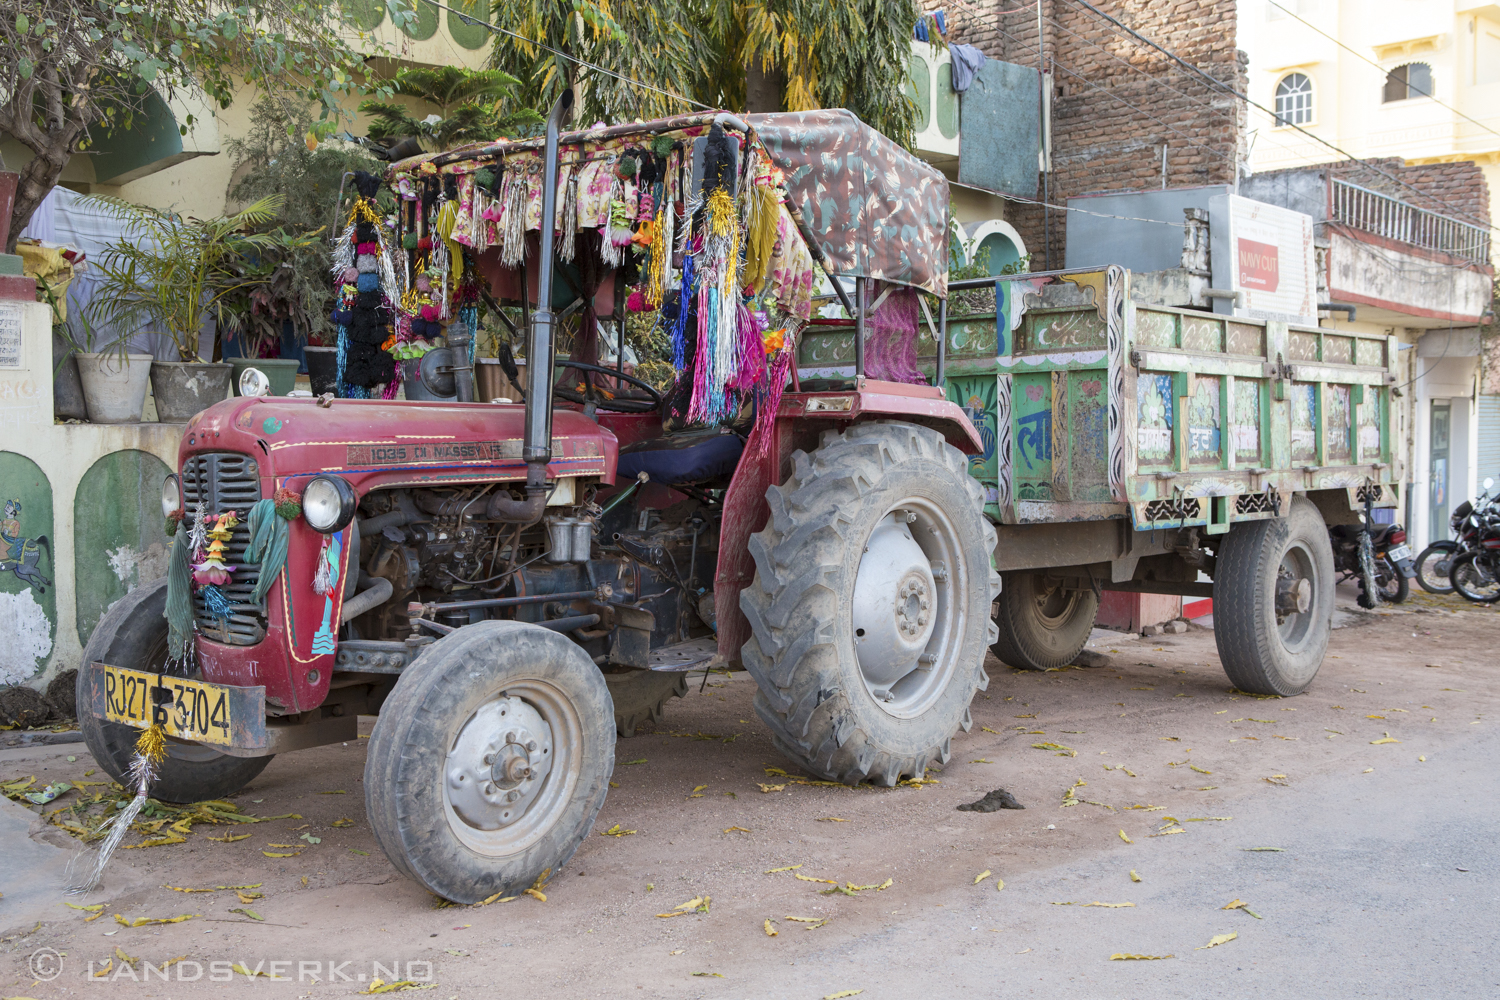 One of many party tractors. Udaipur, India. 

(Canon EOS 5D Mark III / Canon EF 24-70mm f/2.8 L USM)